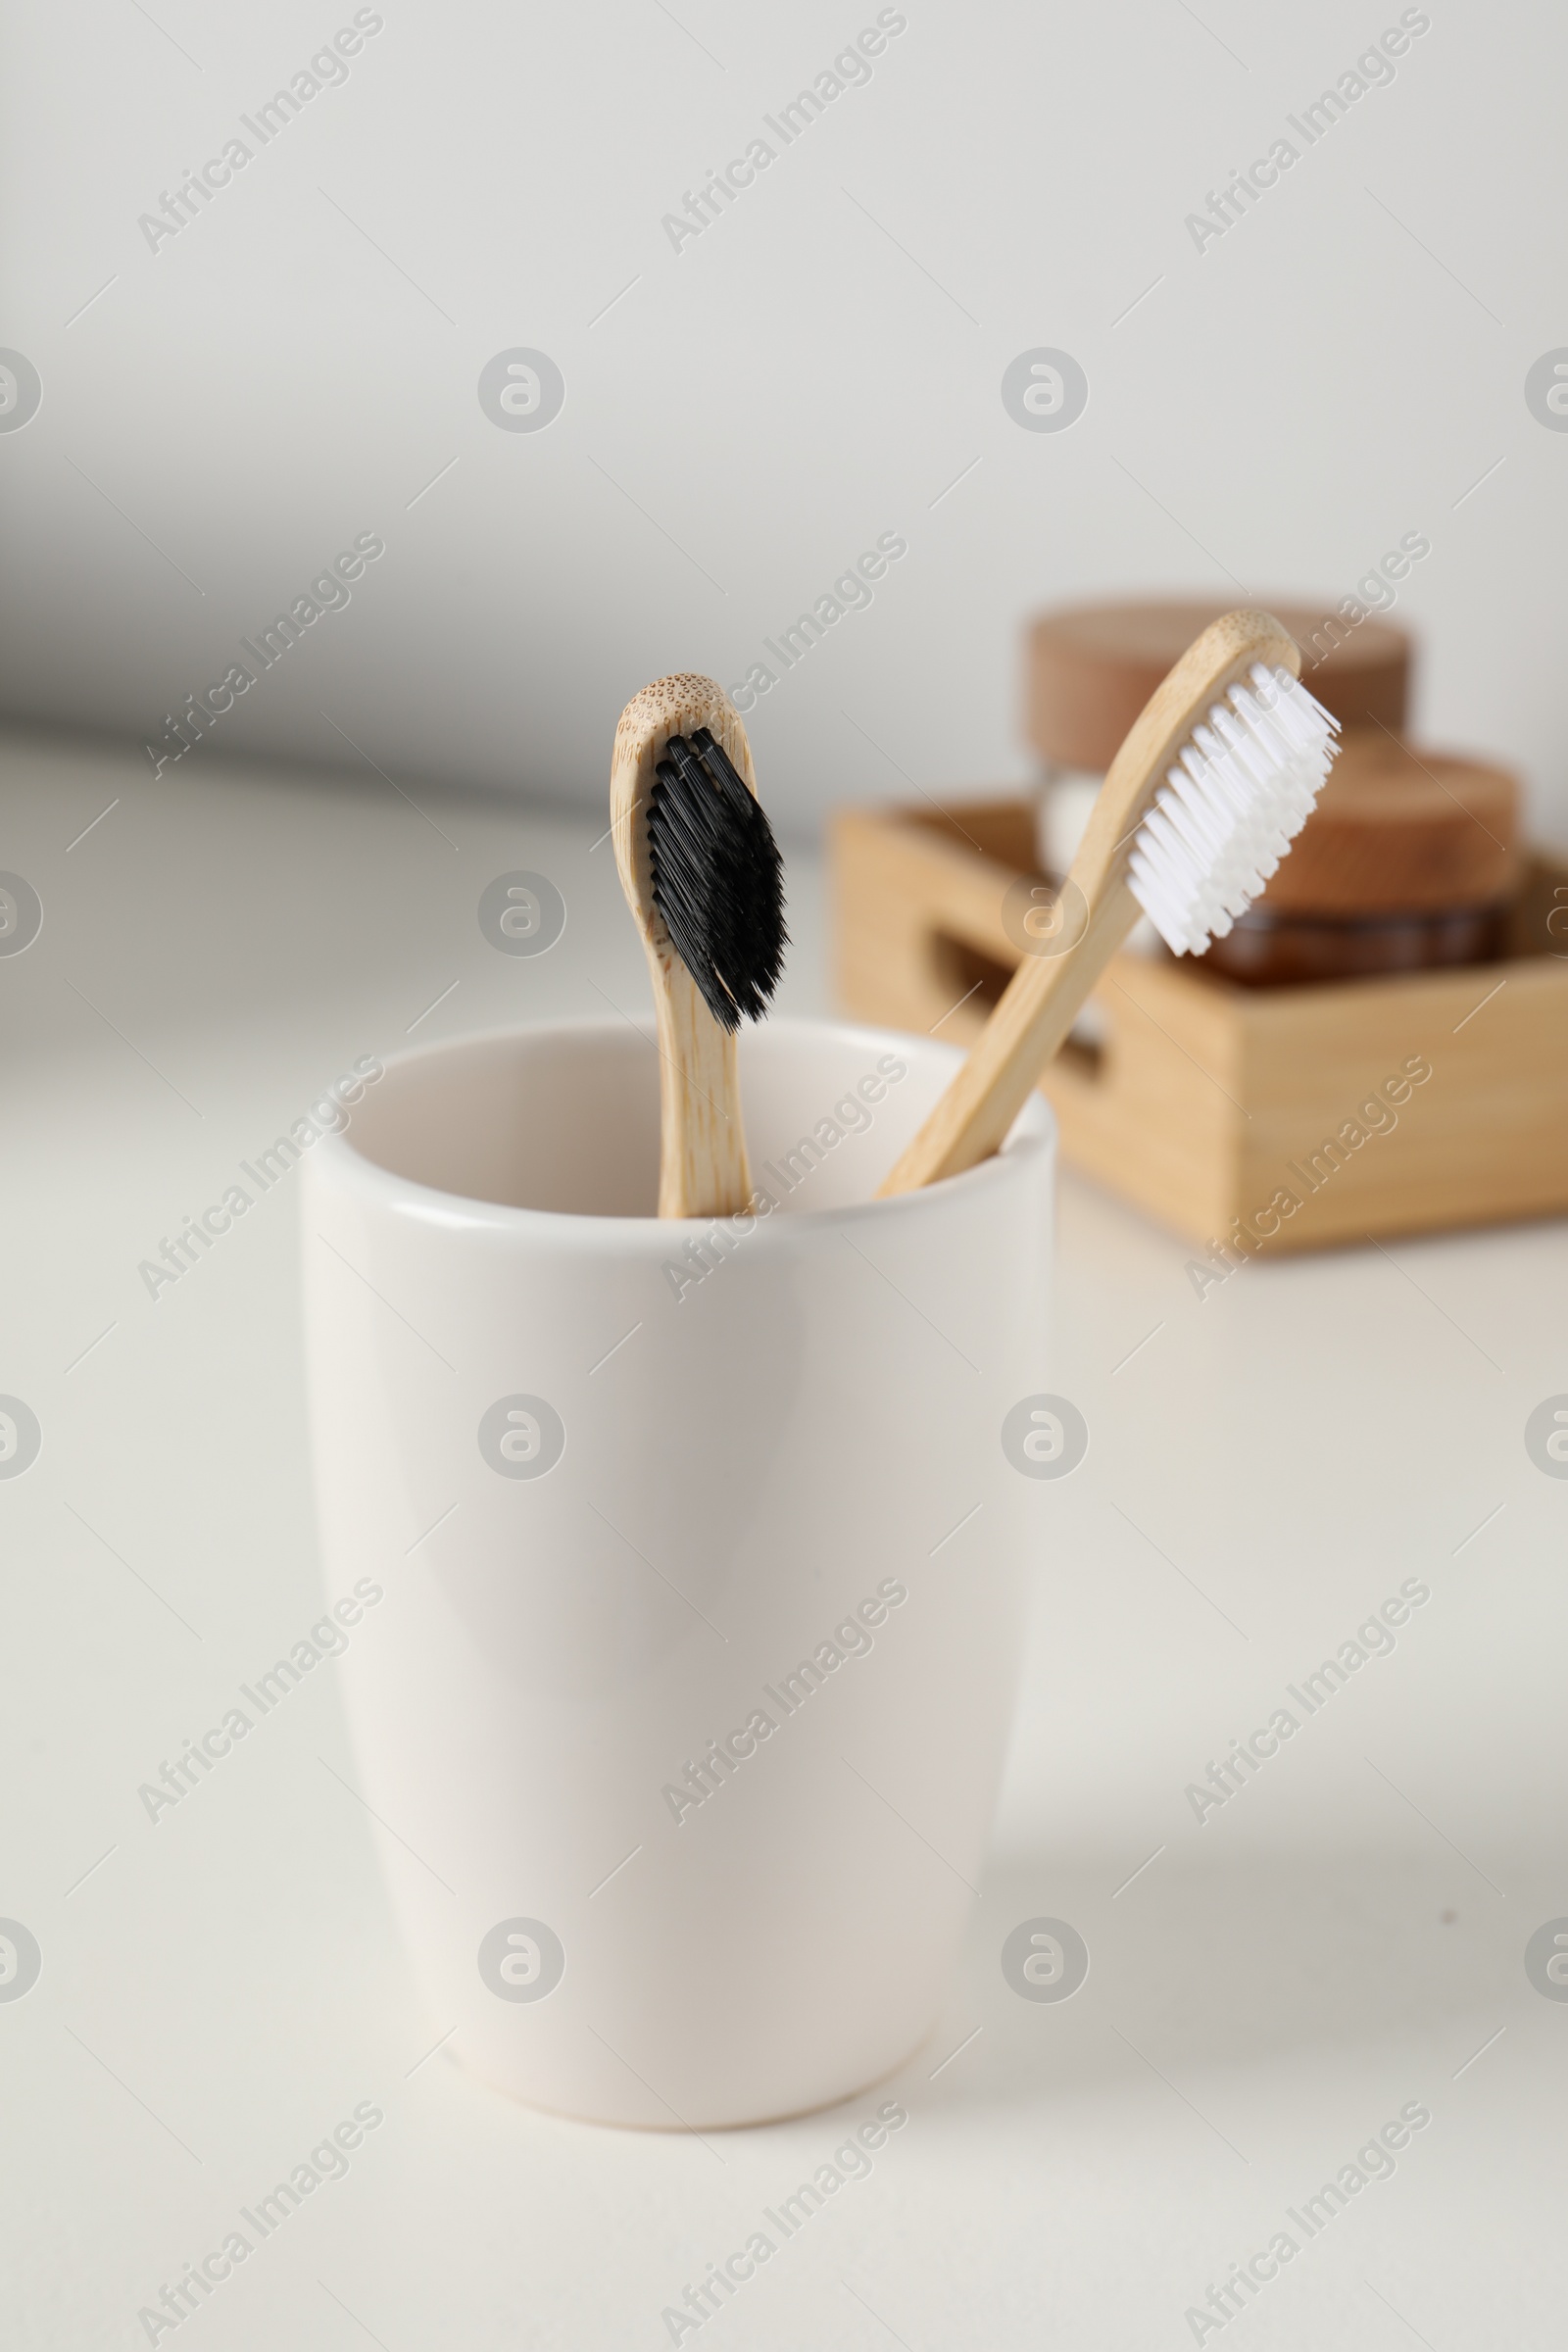 Photo of Bamboo toothbrushes in holder on white countertop